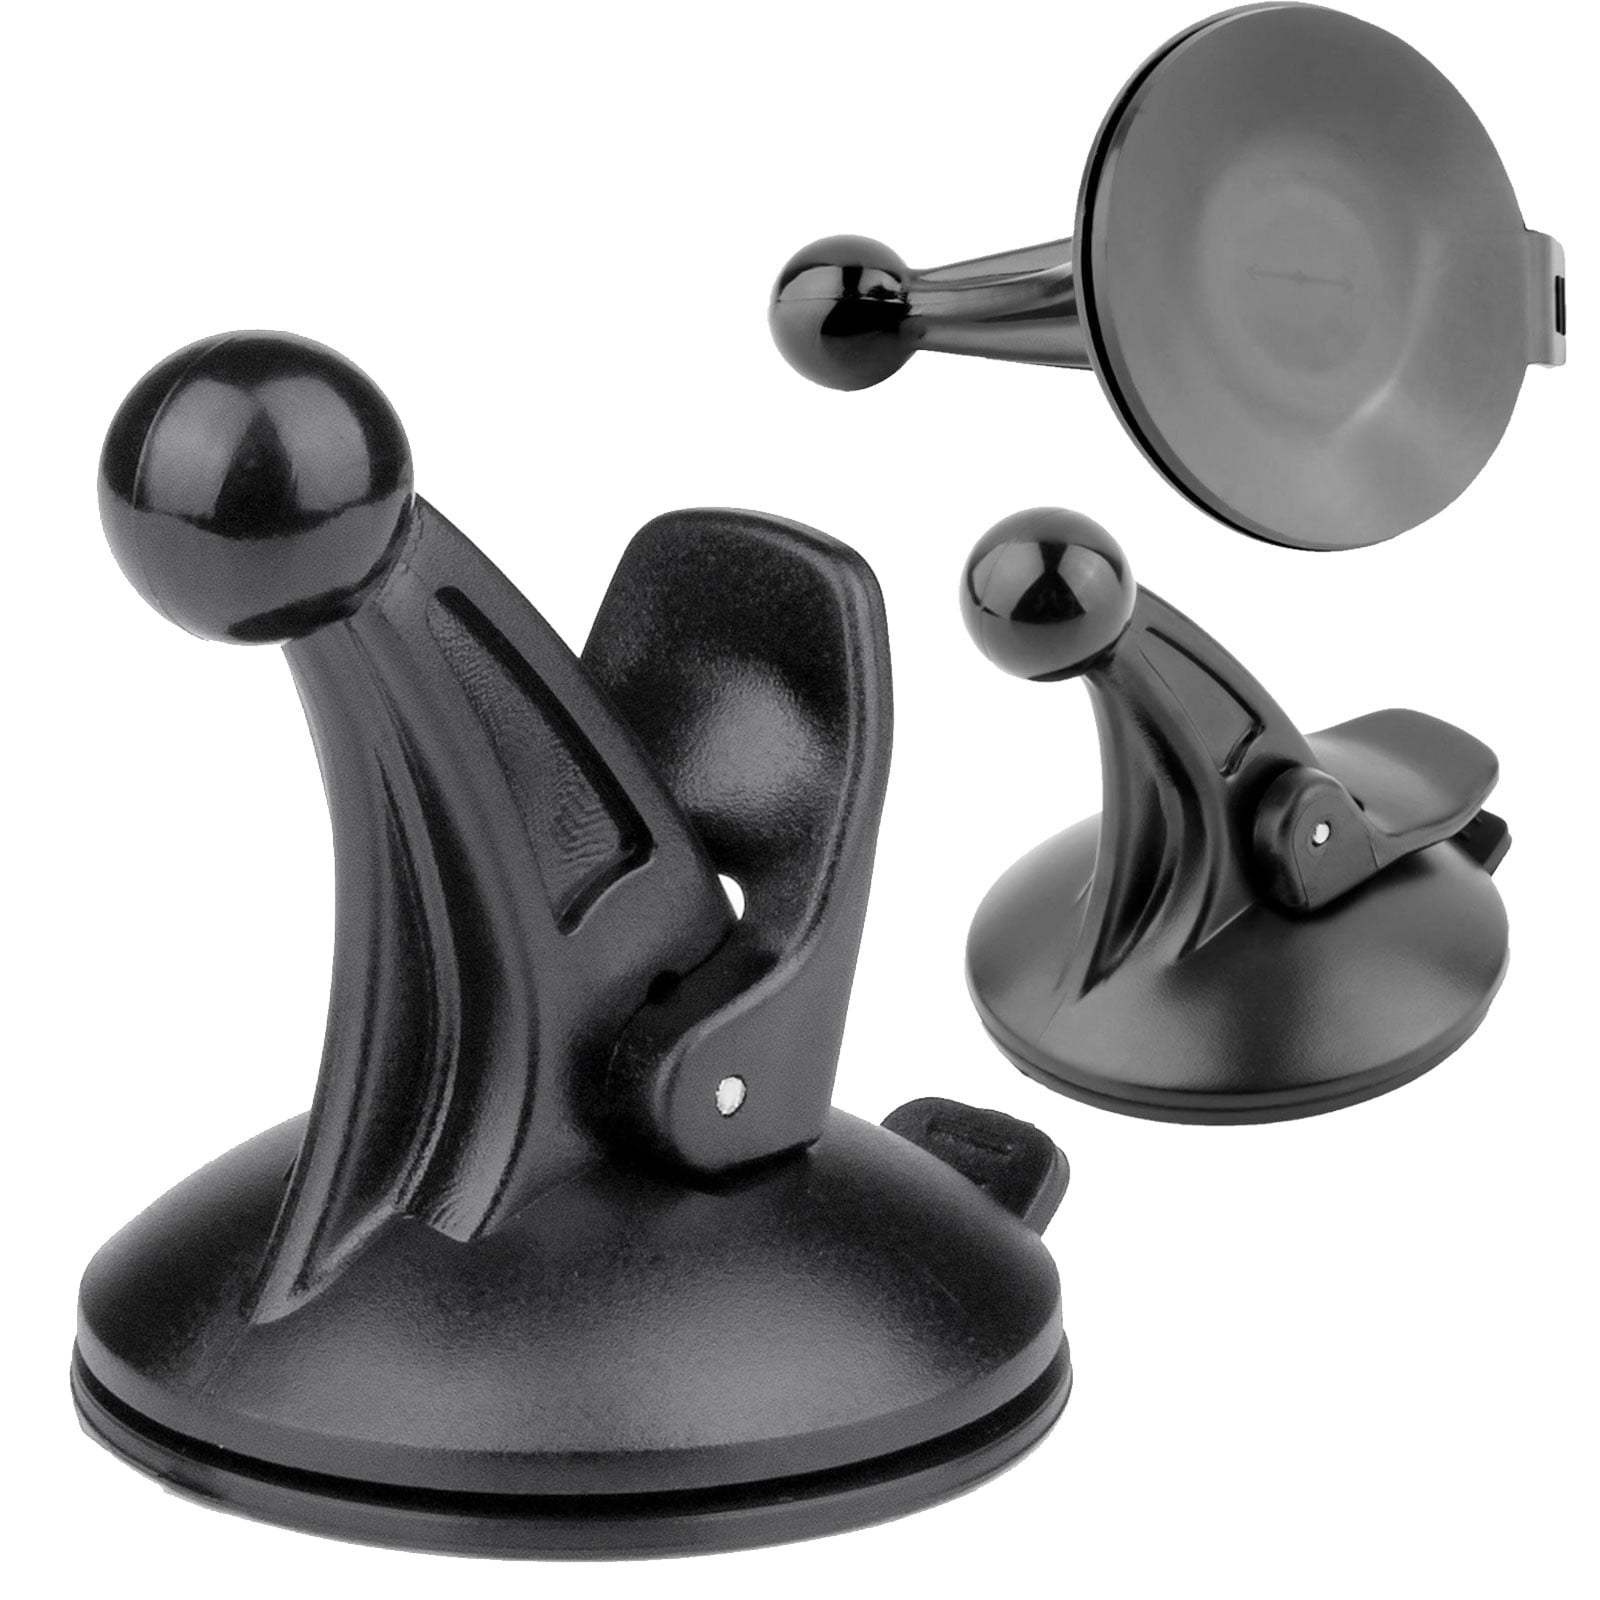 Suction cup support Car GPS Support for Garmin GPS